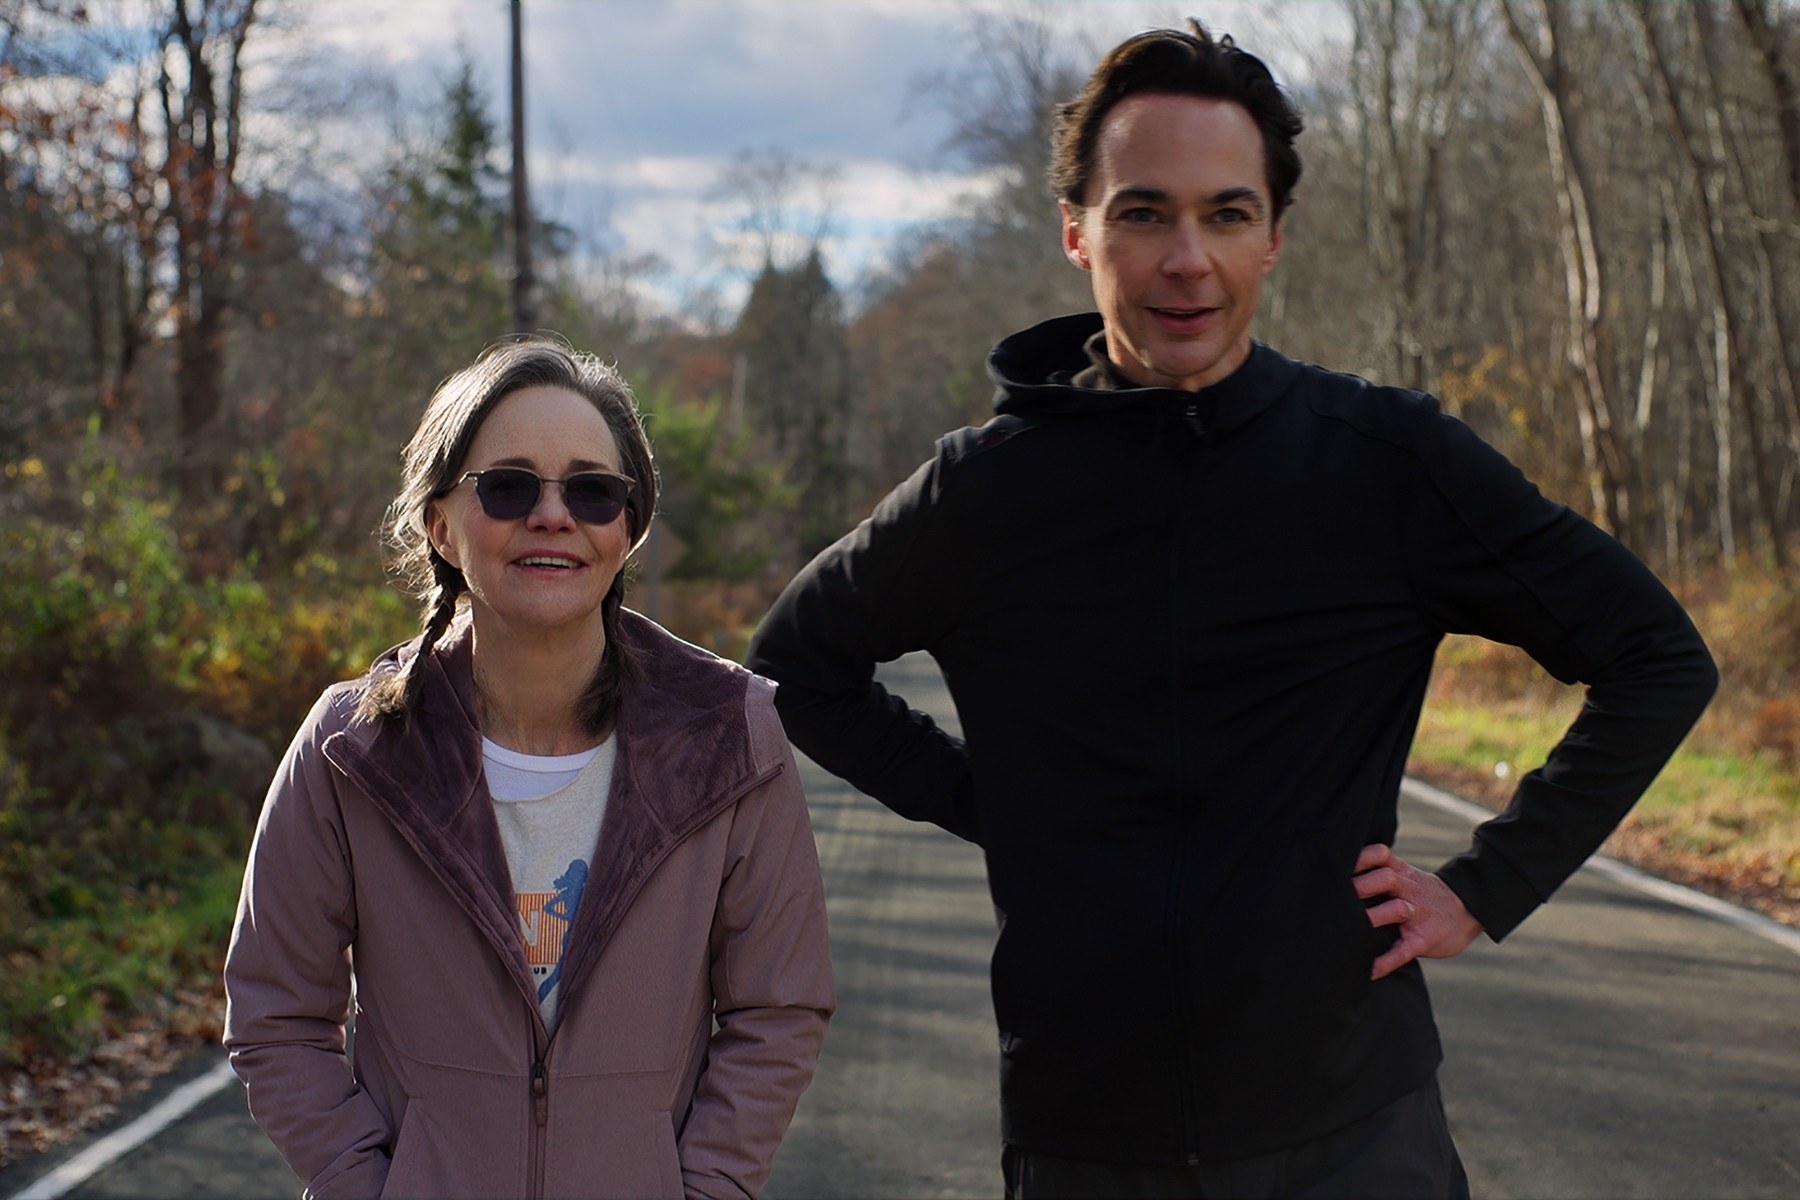 Sally Field and Jim Parsons stand on a road